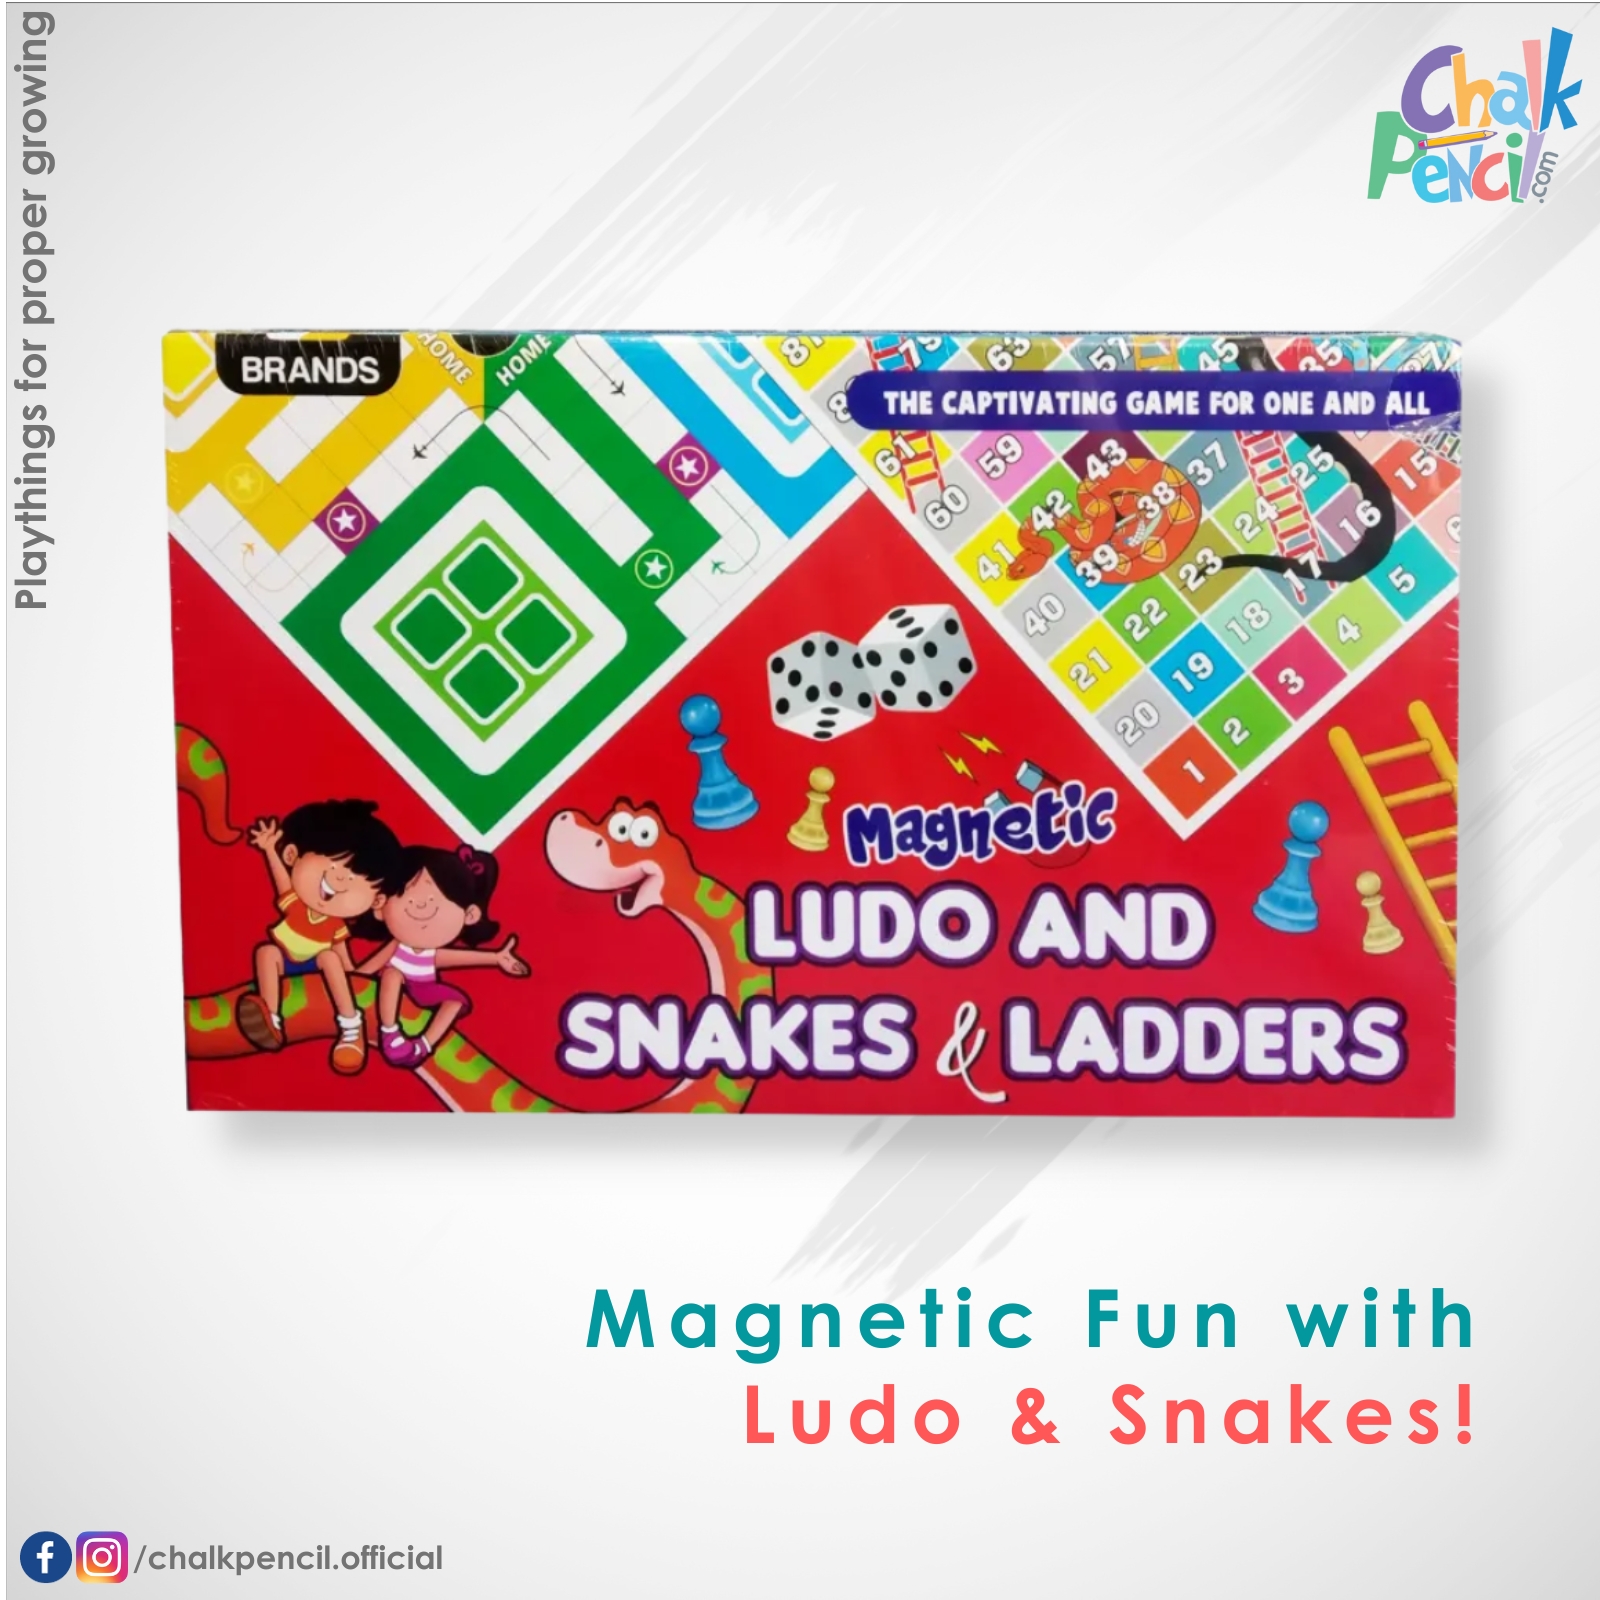 Web BRANDS 76 Magnetic Ludo, Snakes & Ladders (1)